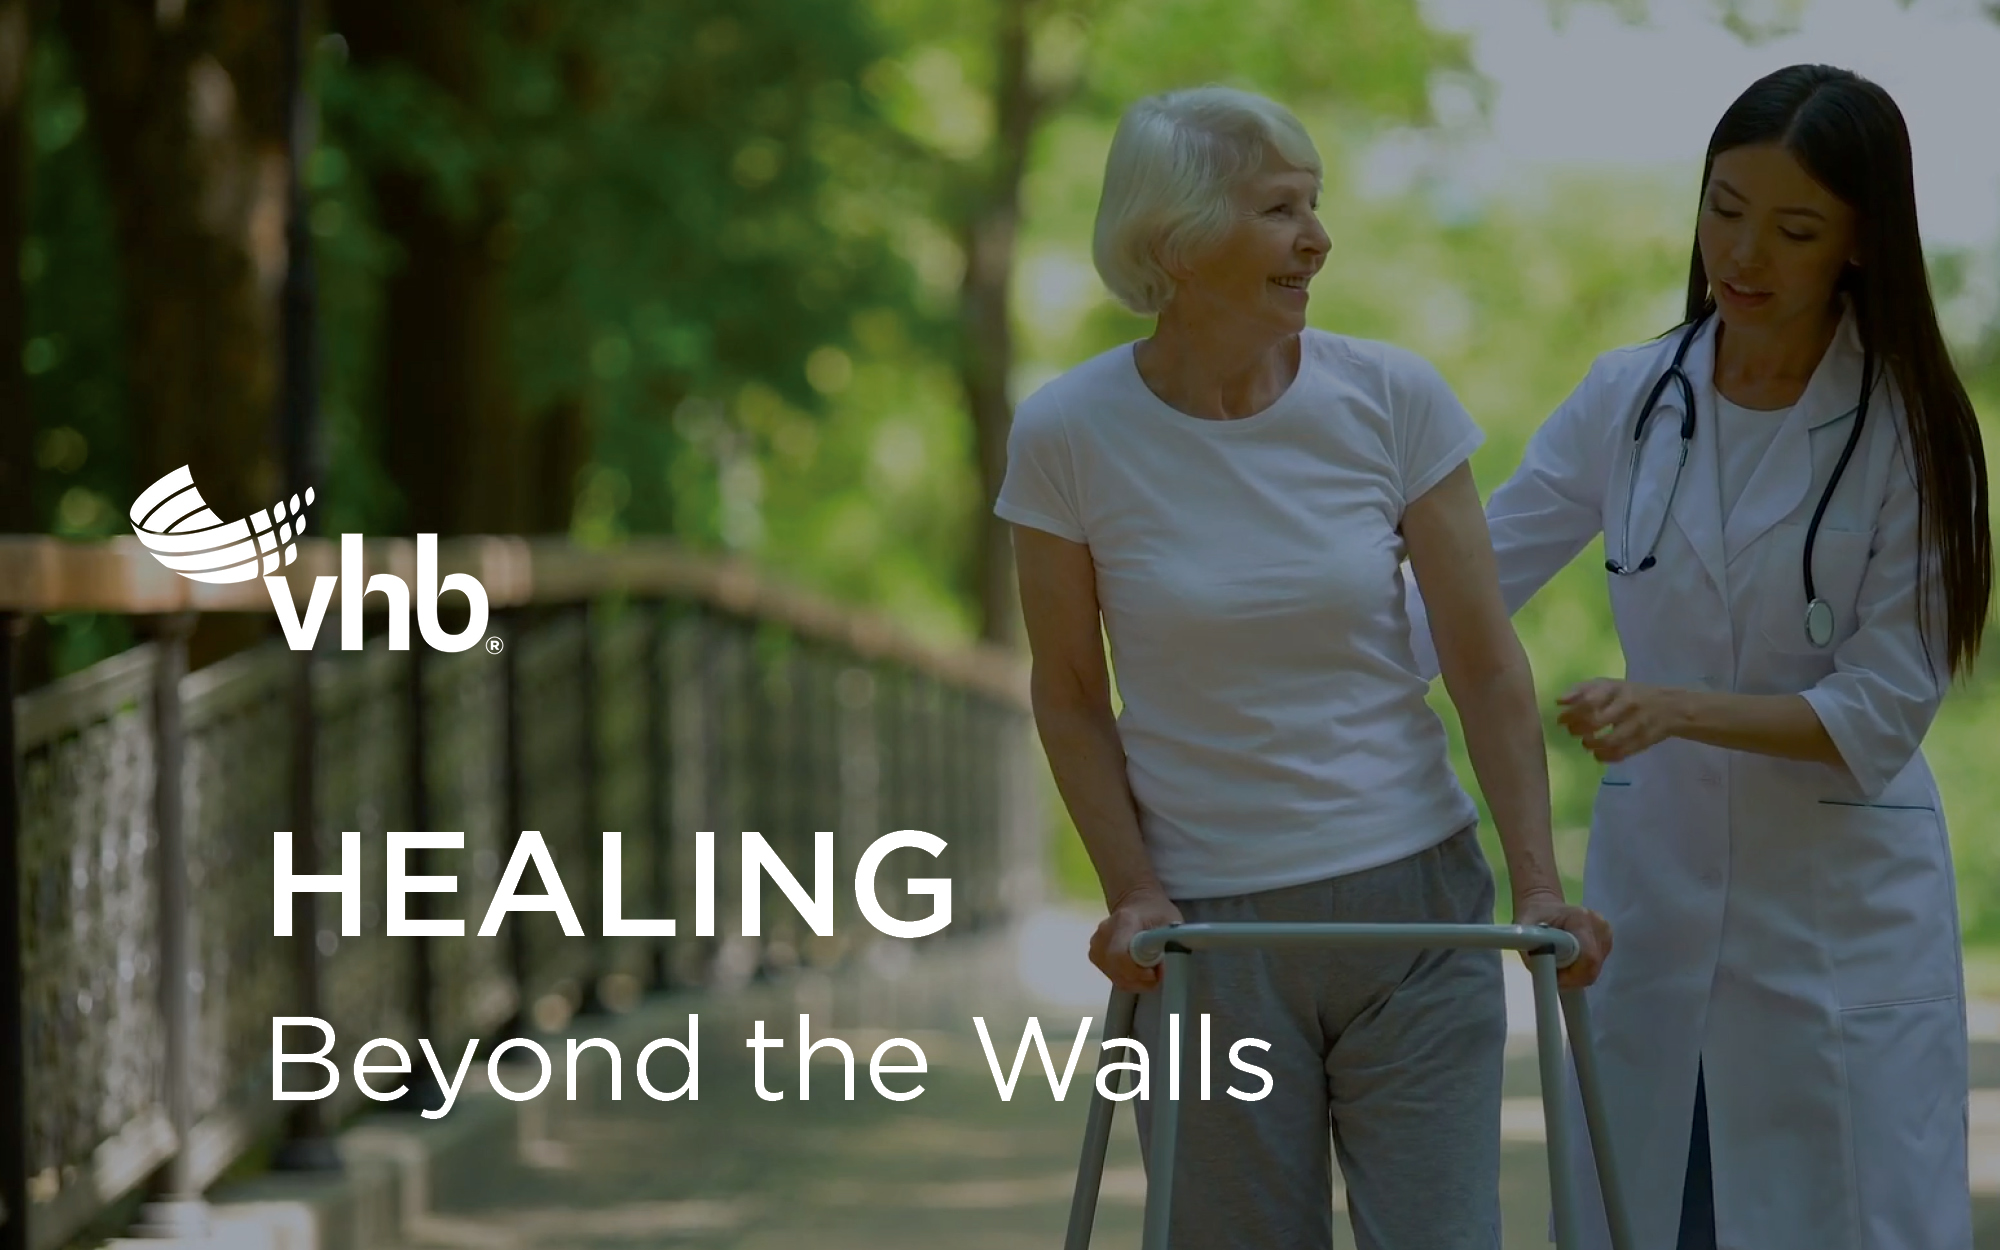 Watch Healing Beyond the Walls: Extending the healthcare environment to improve quality of care.